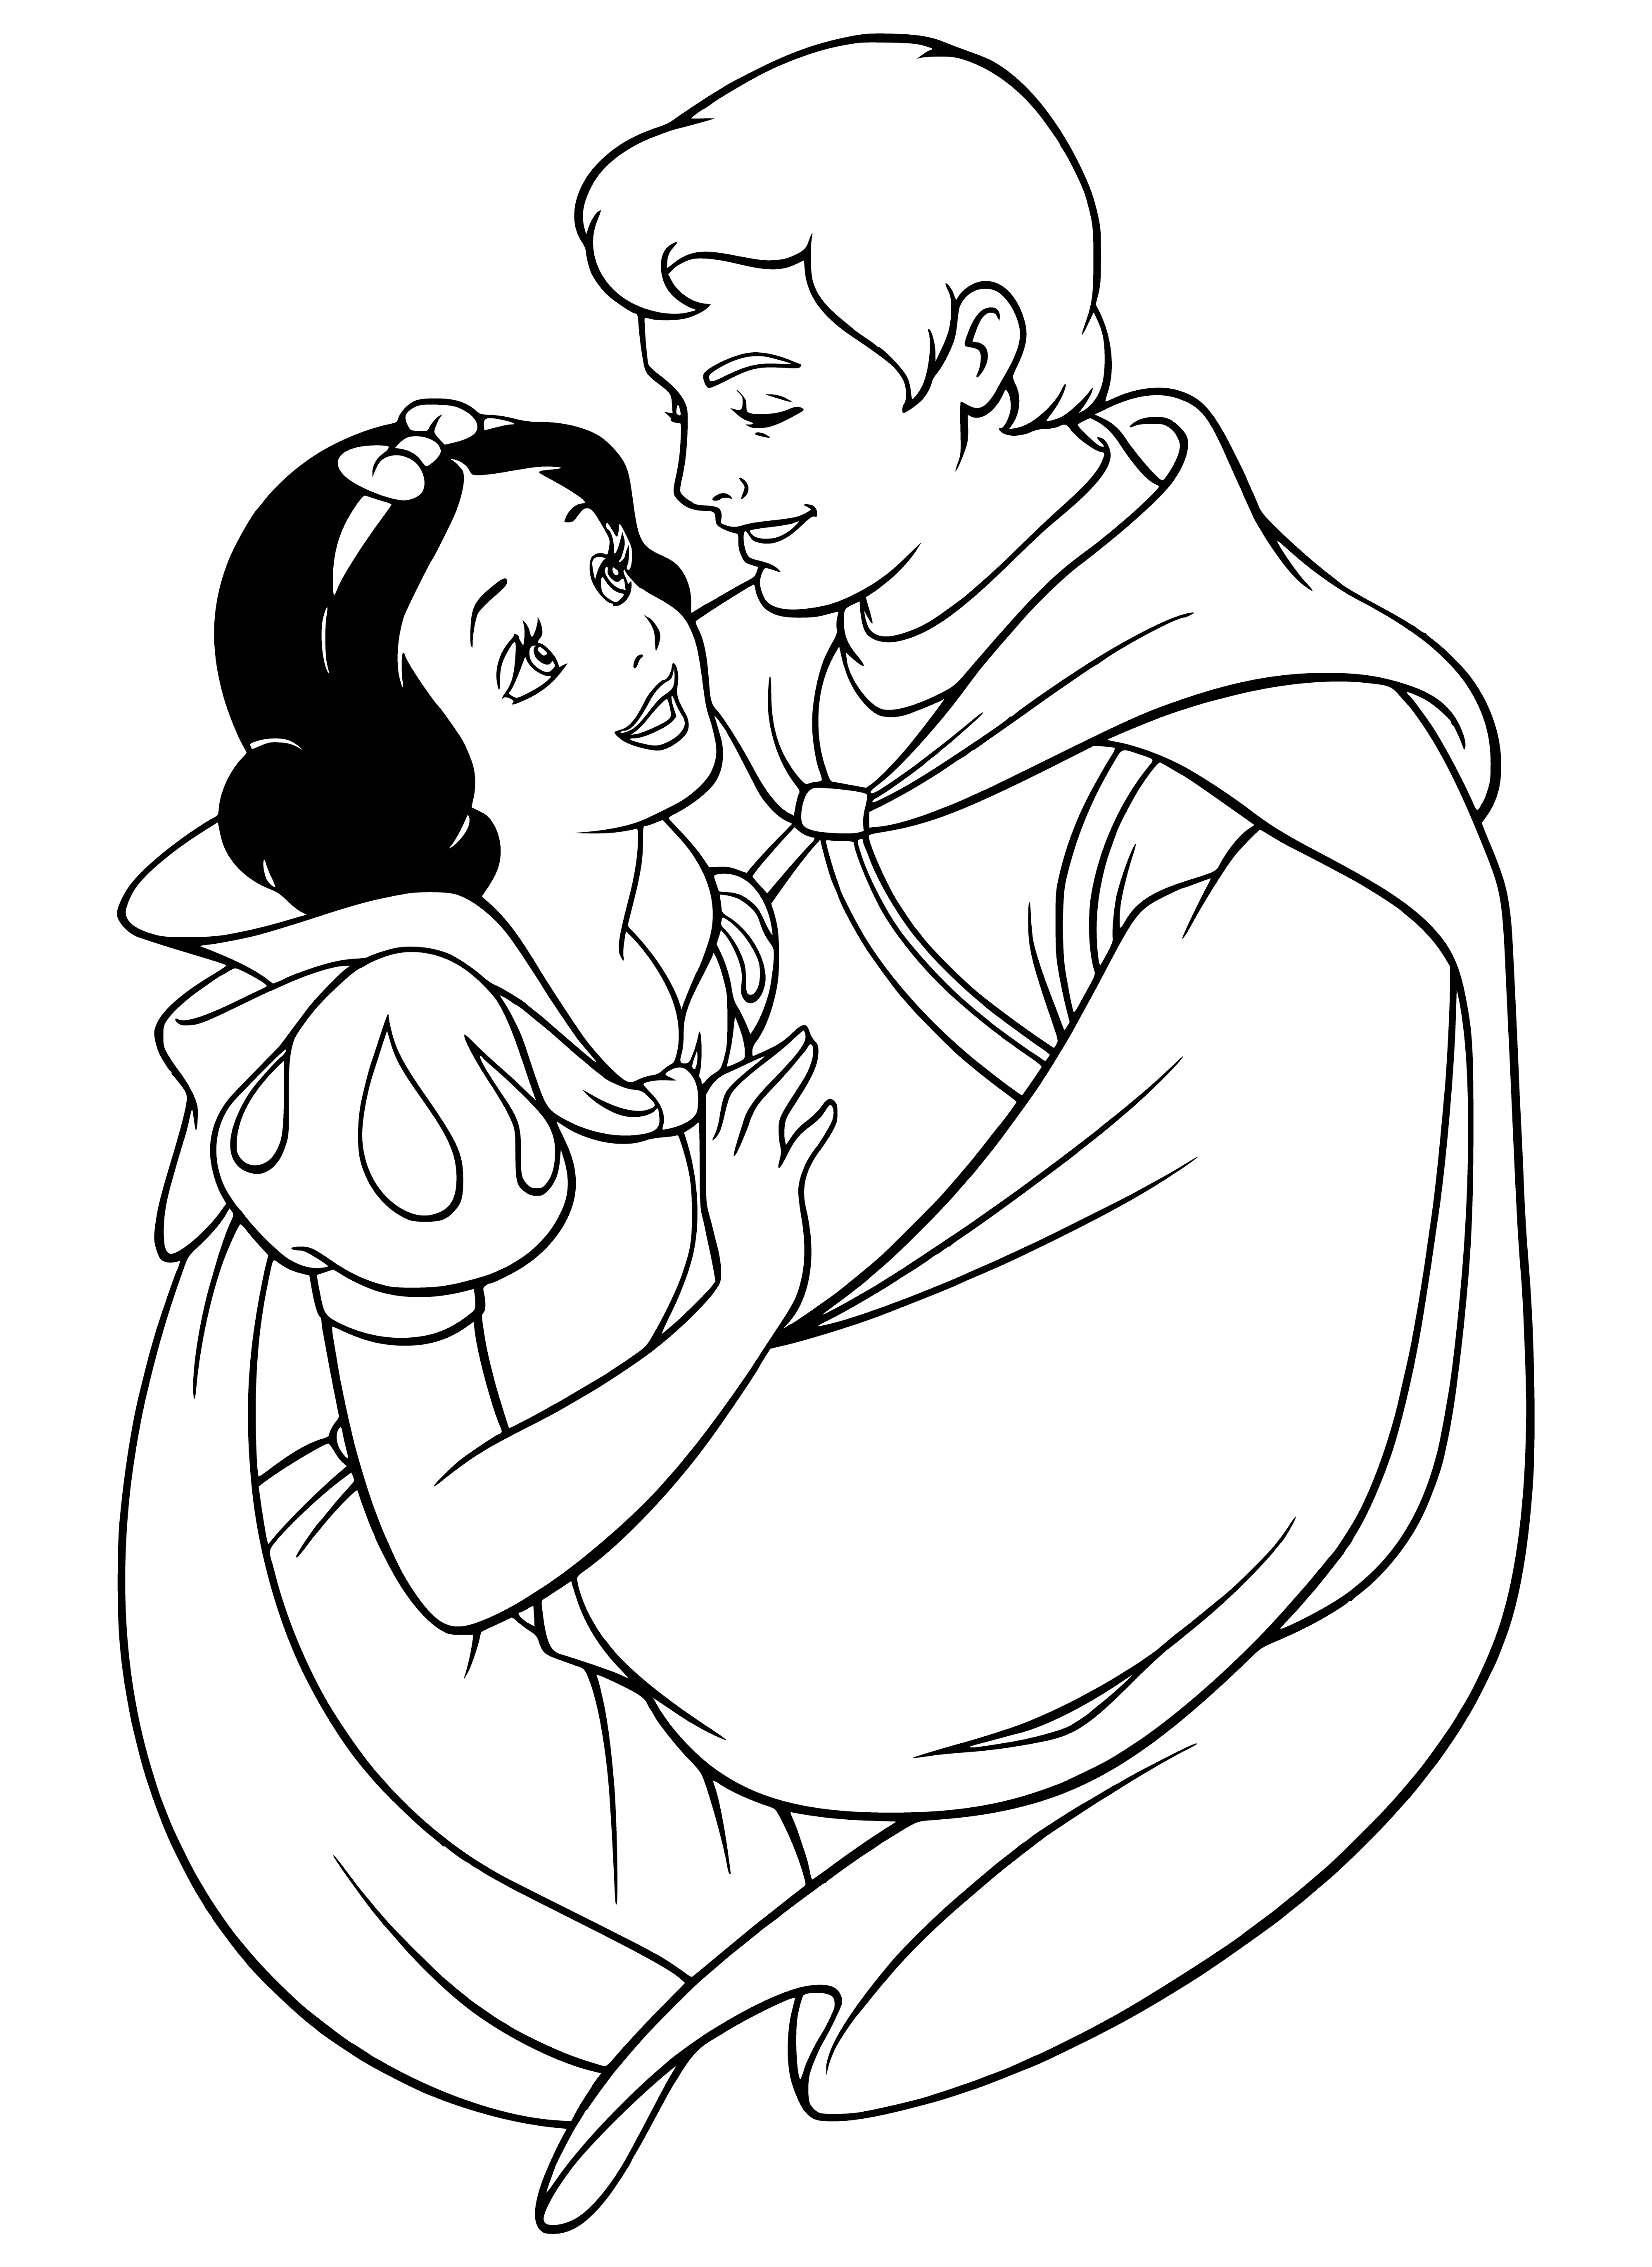 coloring page: Snow White stands smiling in front of the Prince, holding a flower.